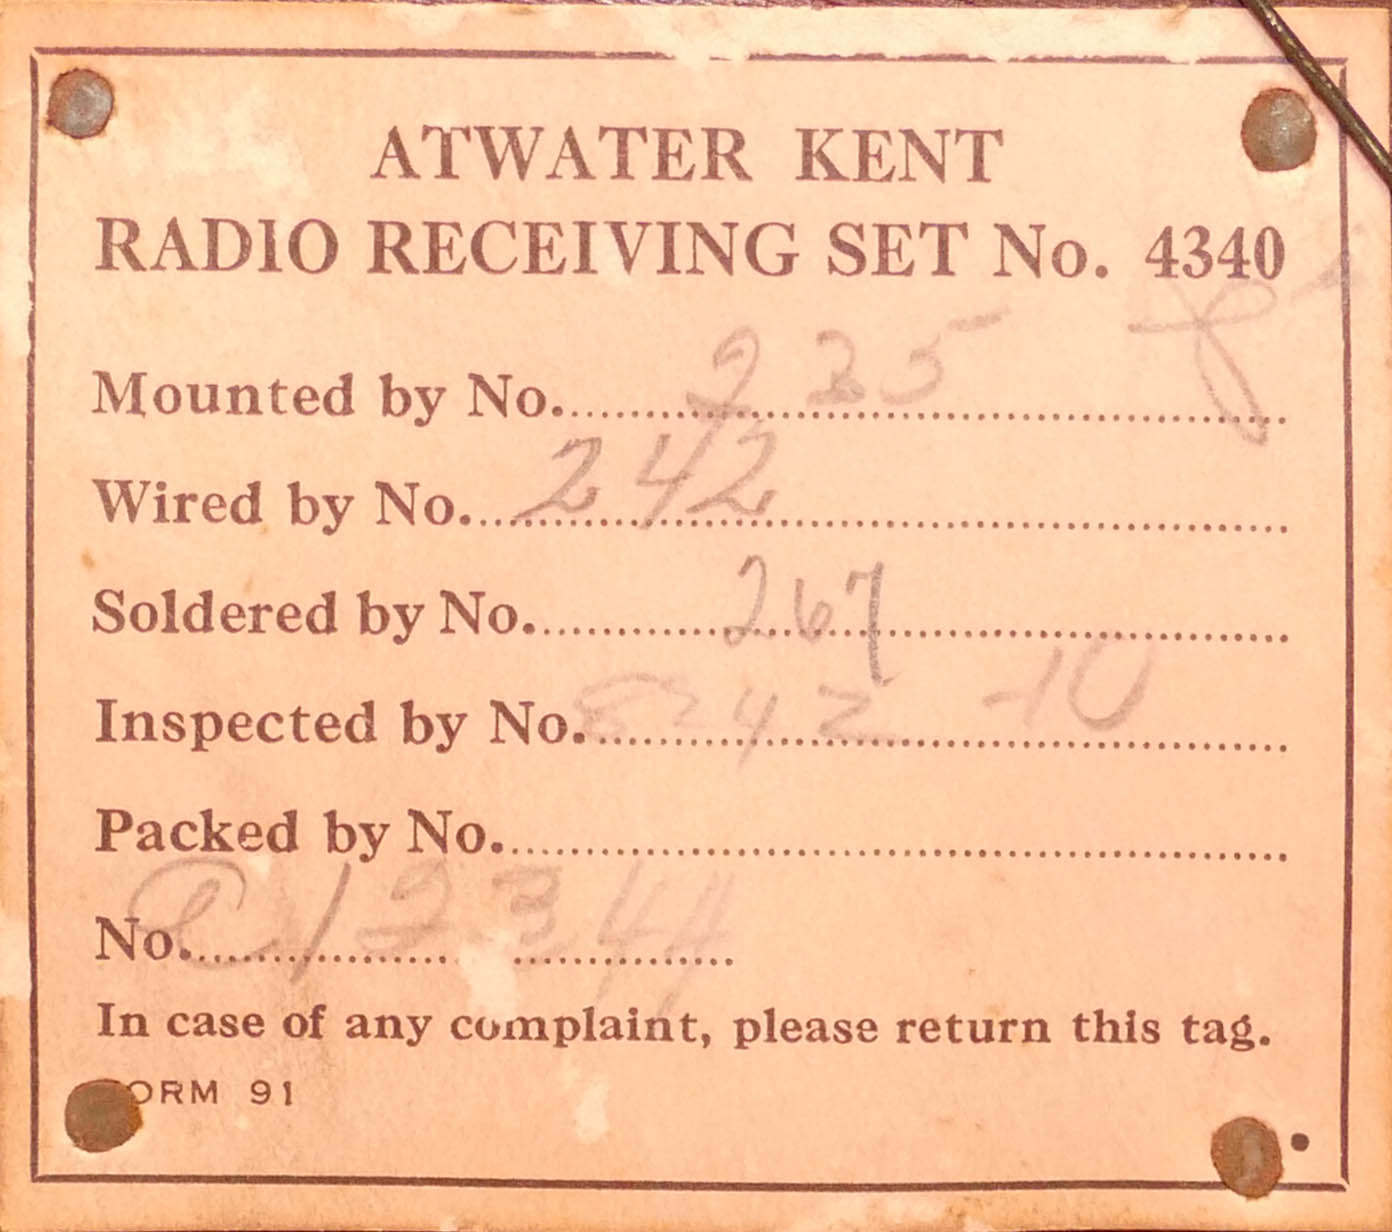 Atwater Kent 10A 4340 #3 label